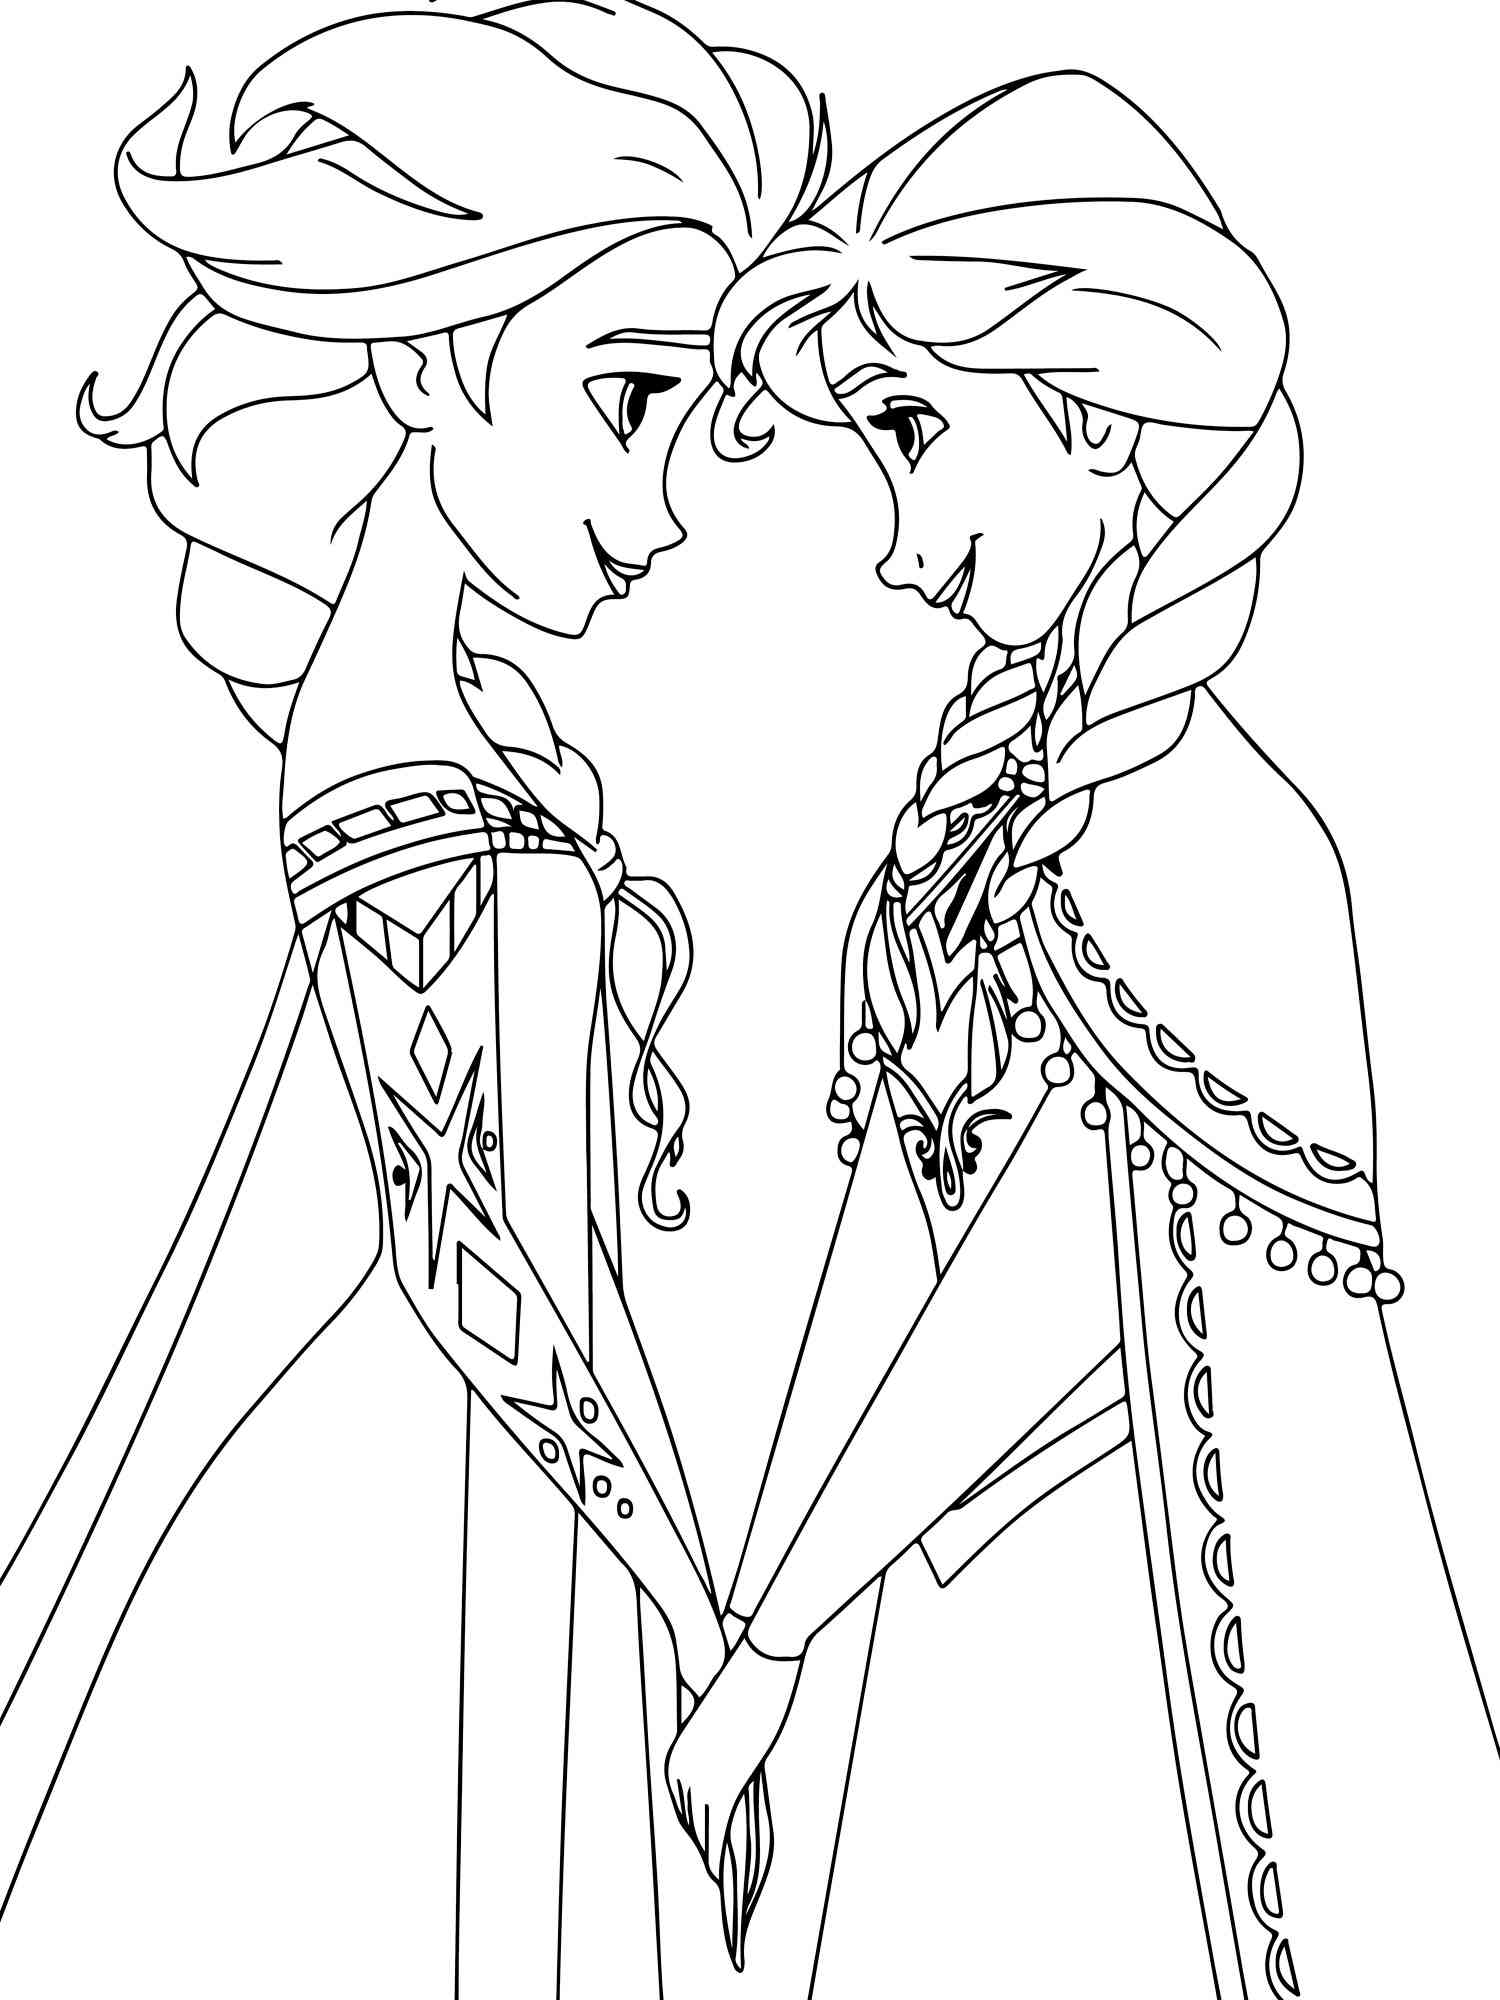 Frozen 15 coloring page